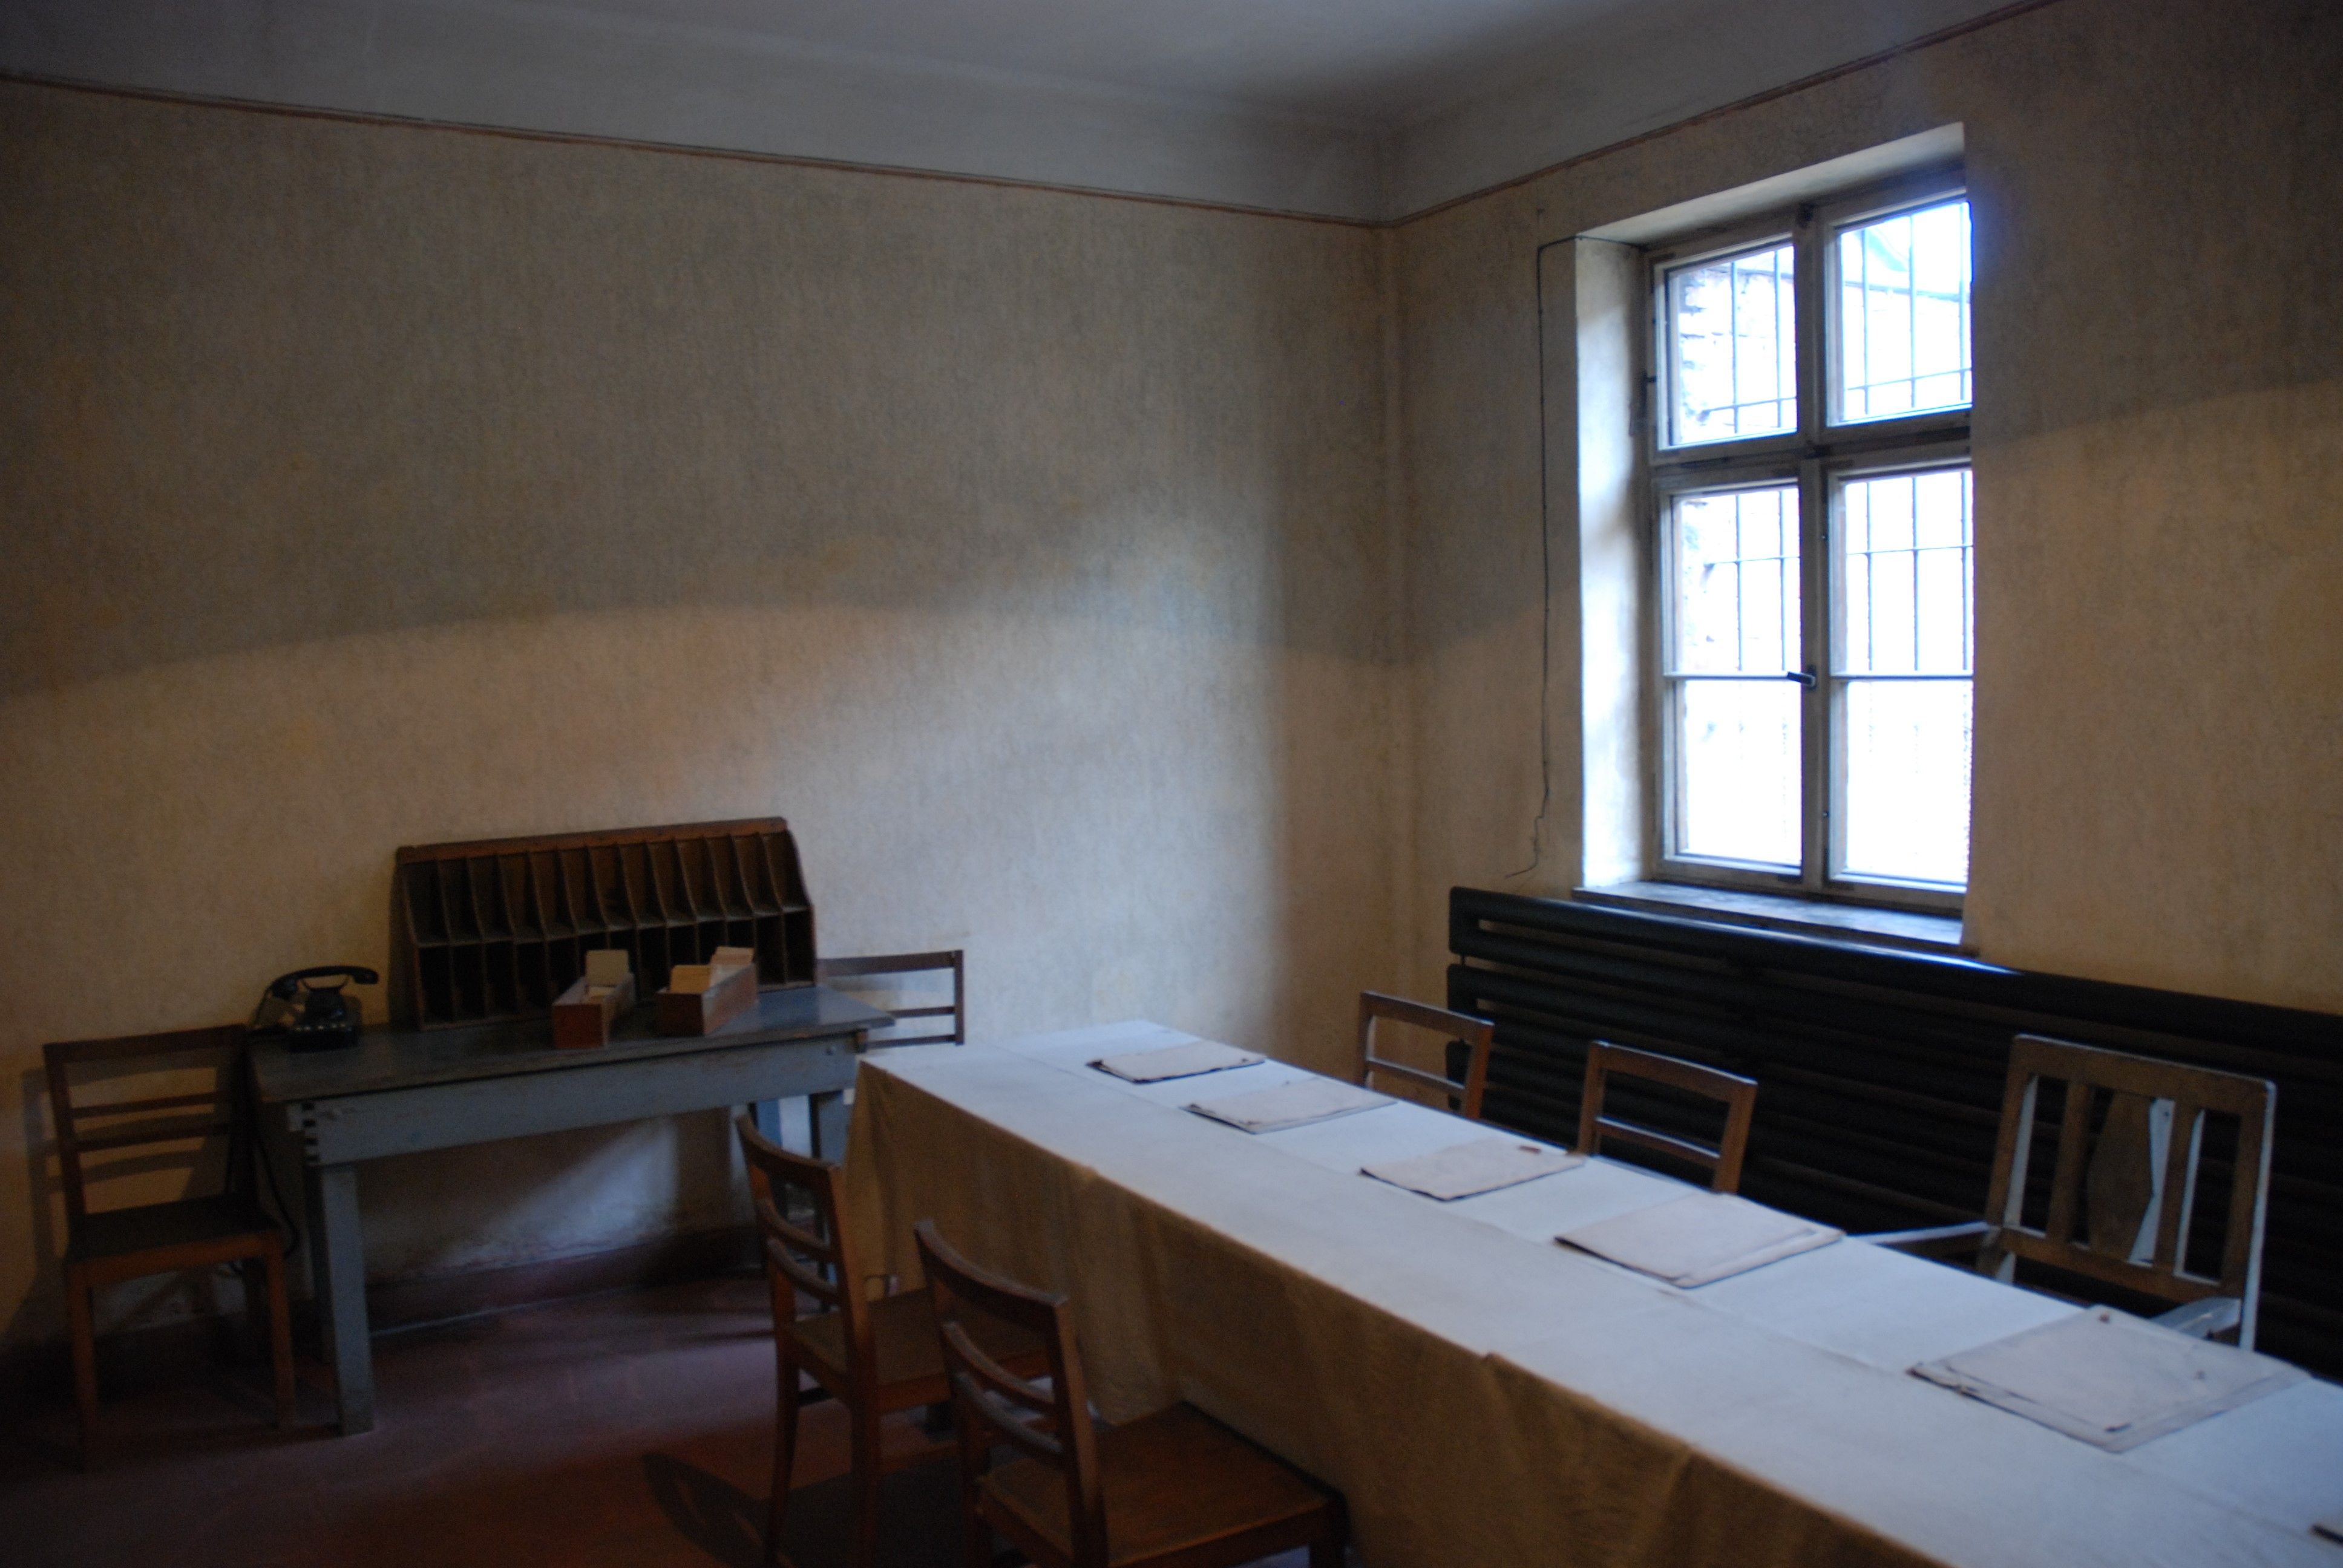 Interior of block 11 - summary courtroom – present-day state. On the right an oblong table on which copies of documents are laid out. On the left a desk and a chair. A window in the background.